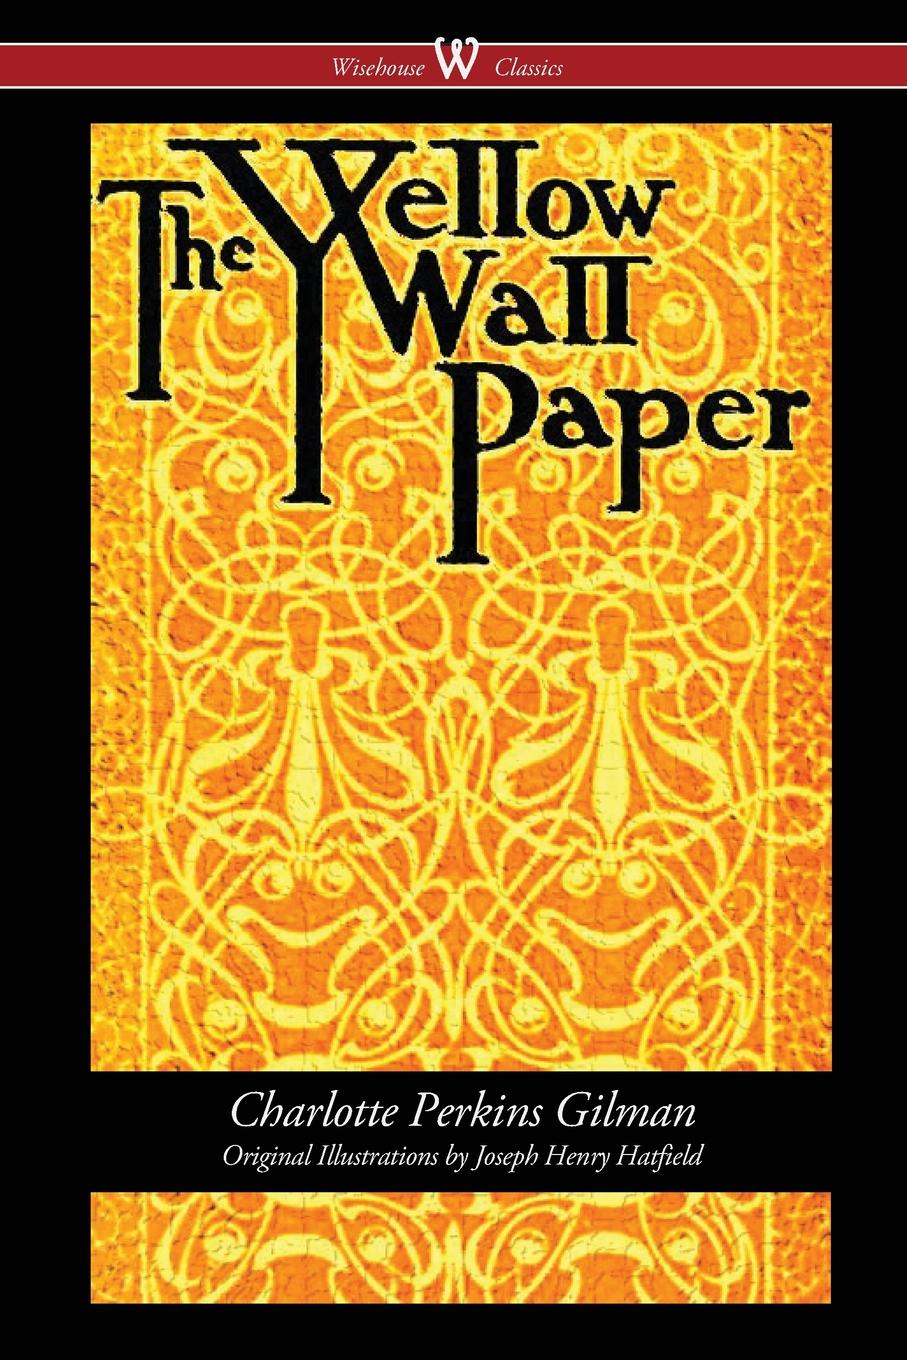 The Yellow Wallpaper First Edition With Original